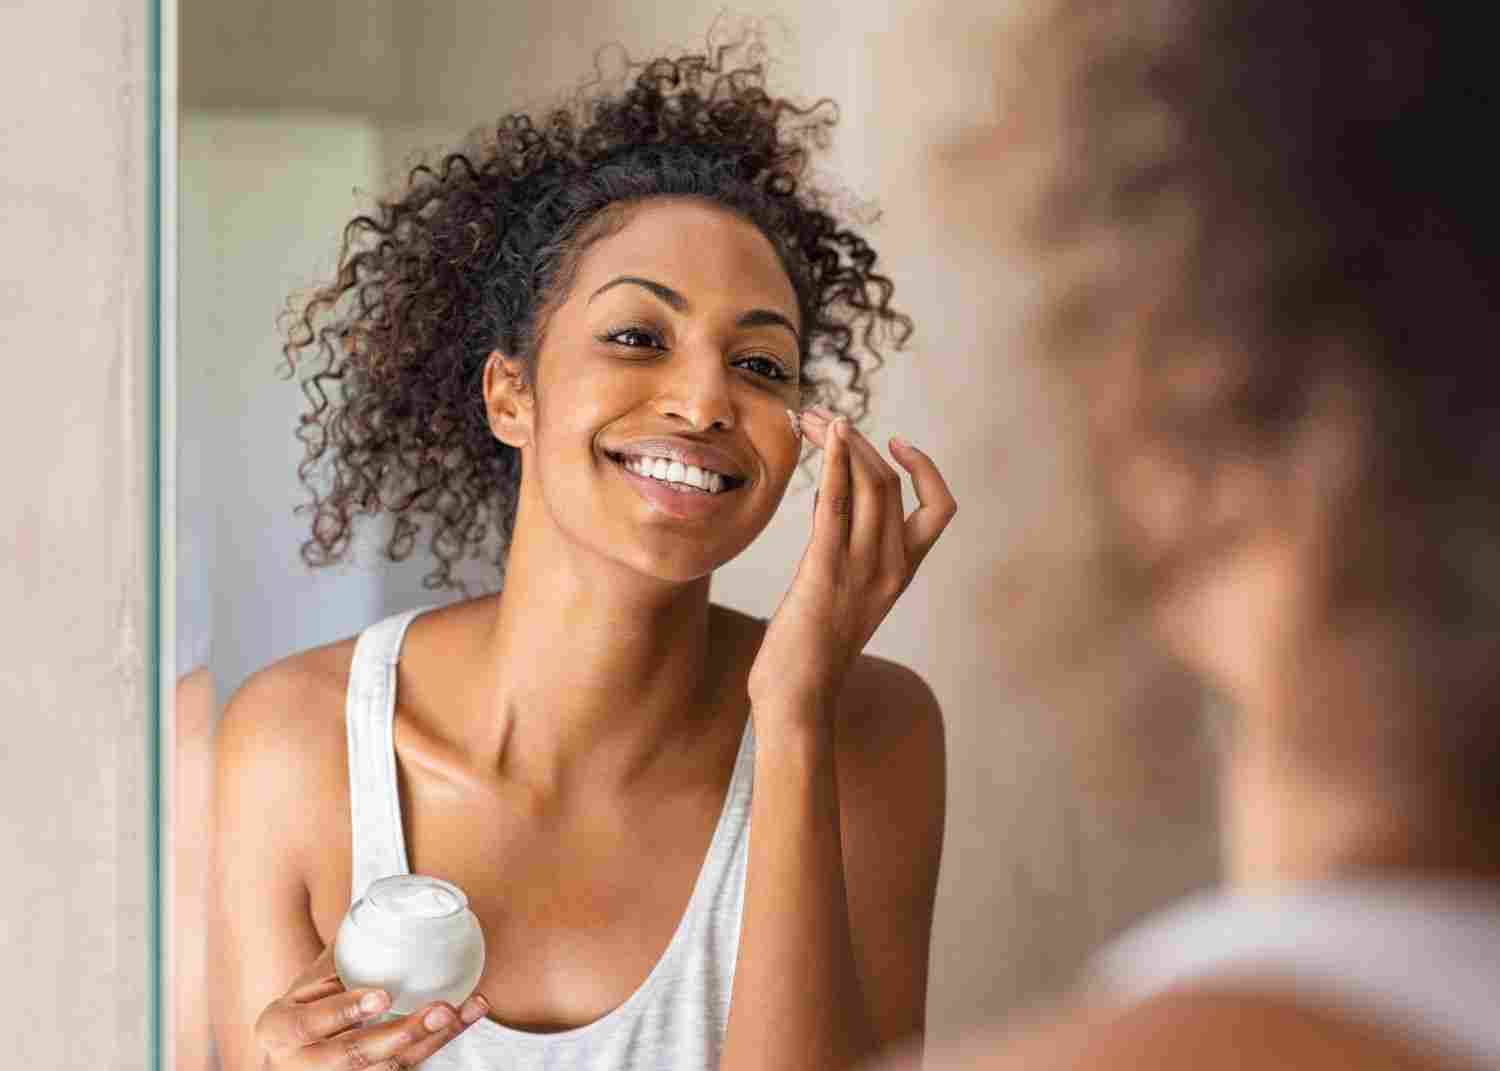 What's the Difference Between Lotions and Moisturizers?